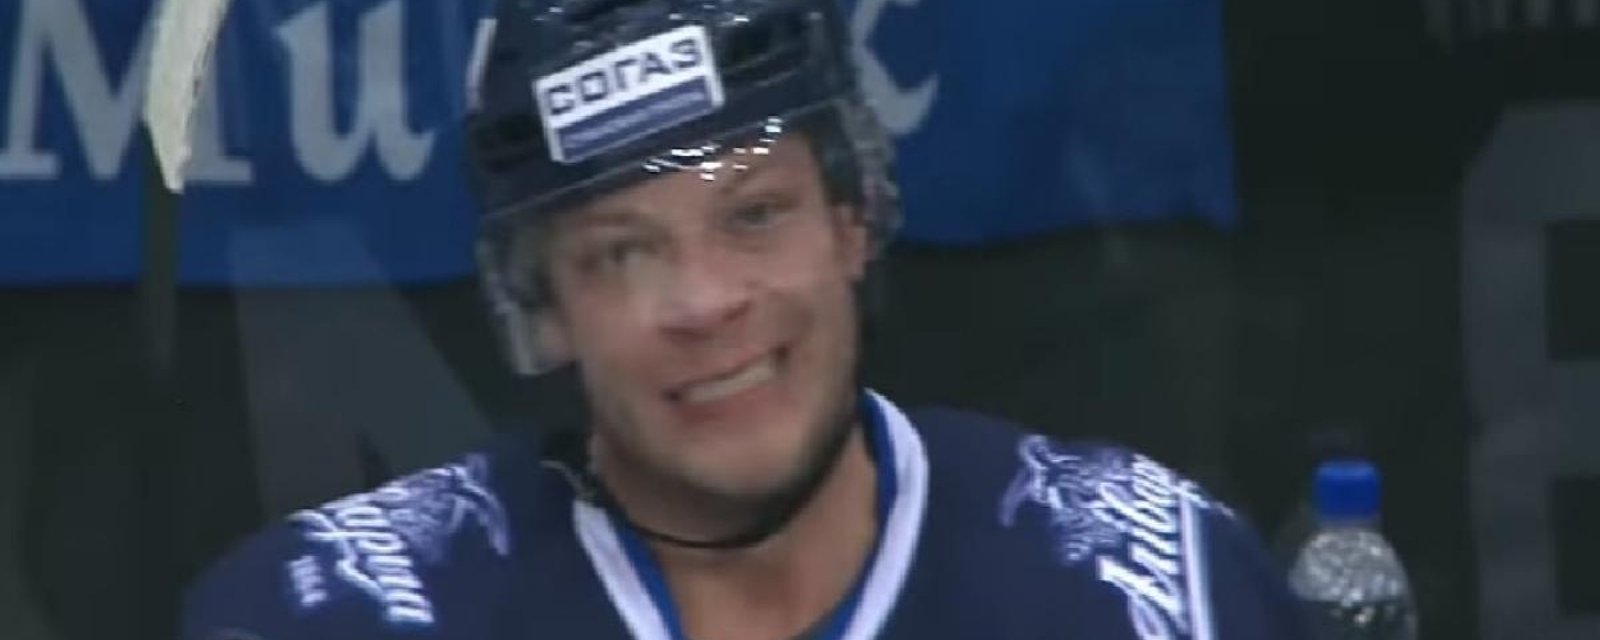 Former NHLer Sergei Kostitsyn score in his own net... twice in the same game!